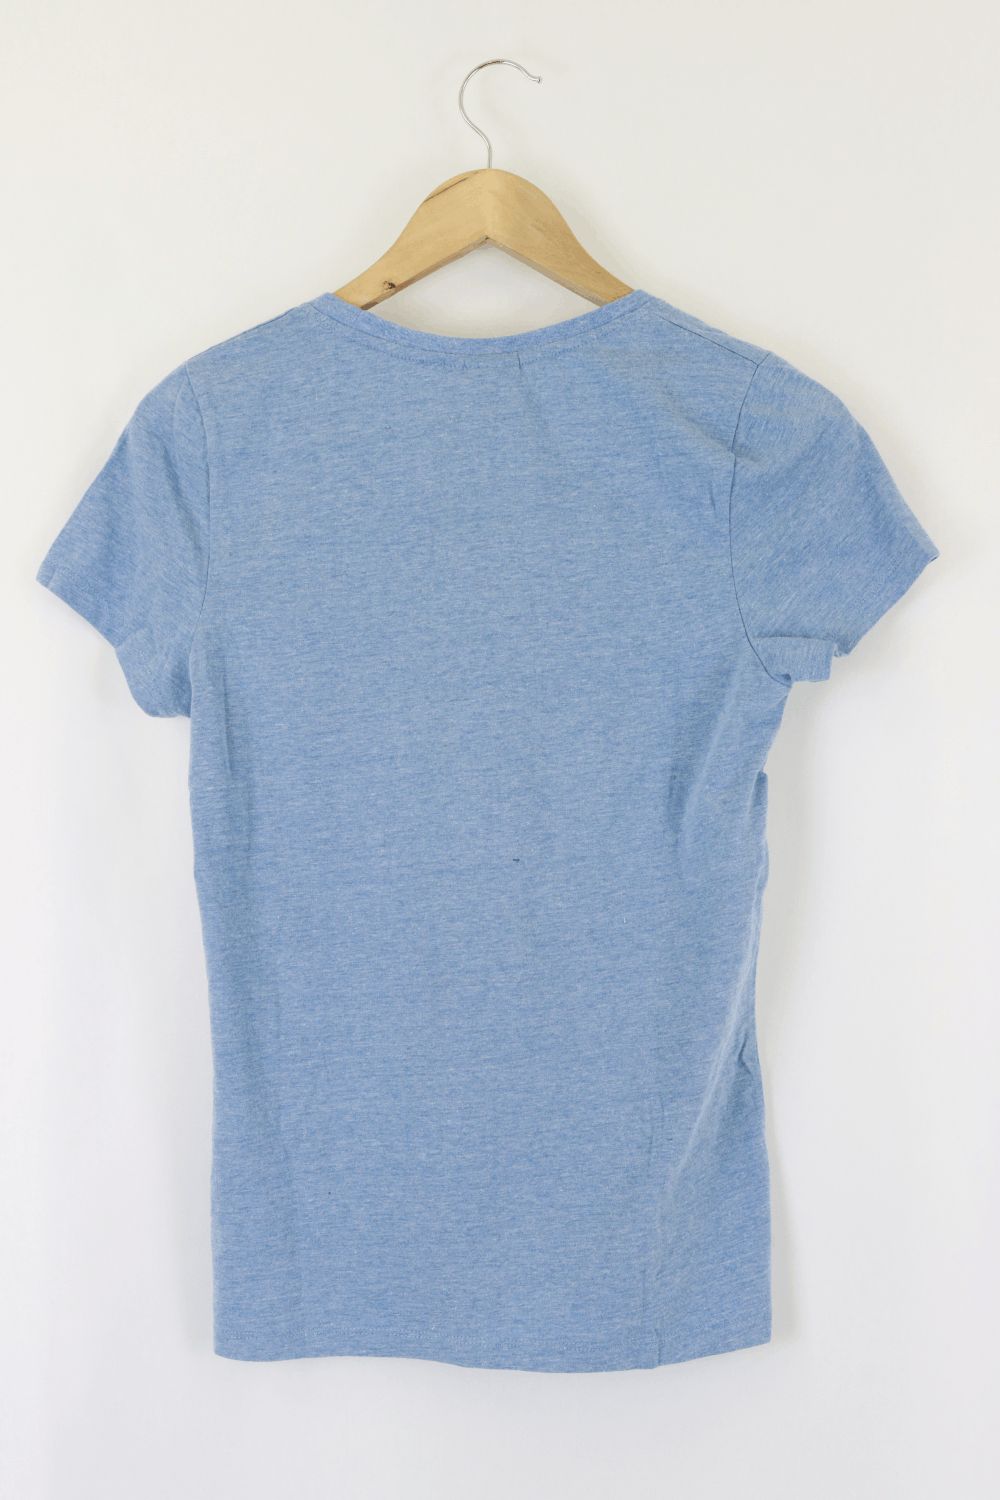 Pacific Creations Blue T-shirt S